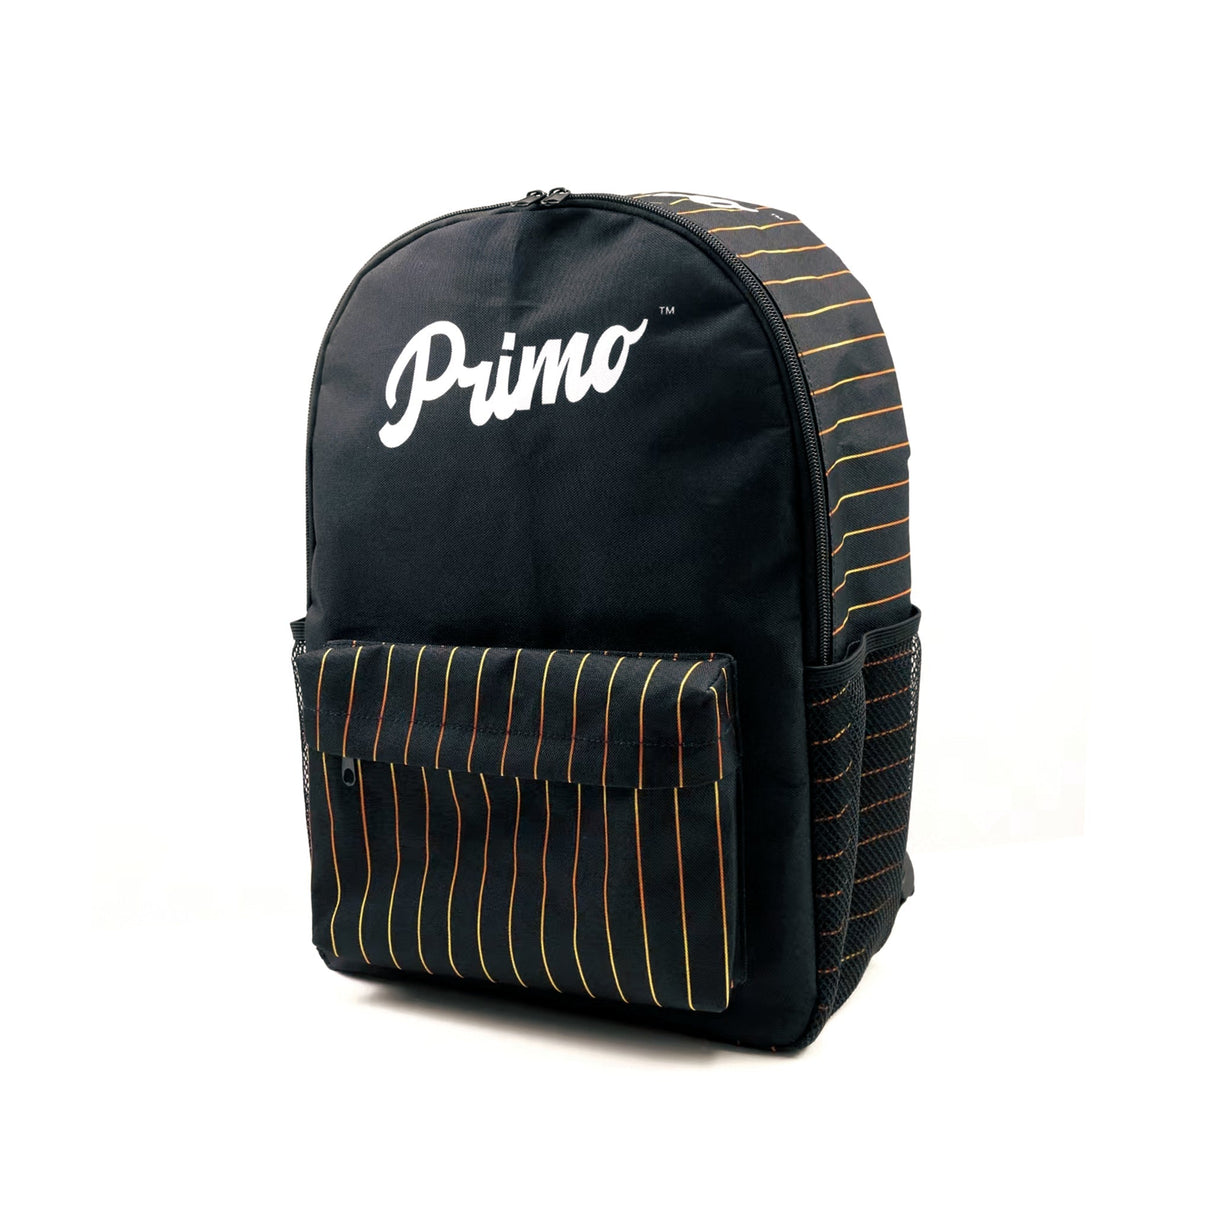 Primo Limited Edition Backpack front view on a seamless white background